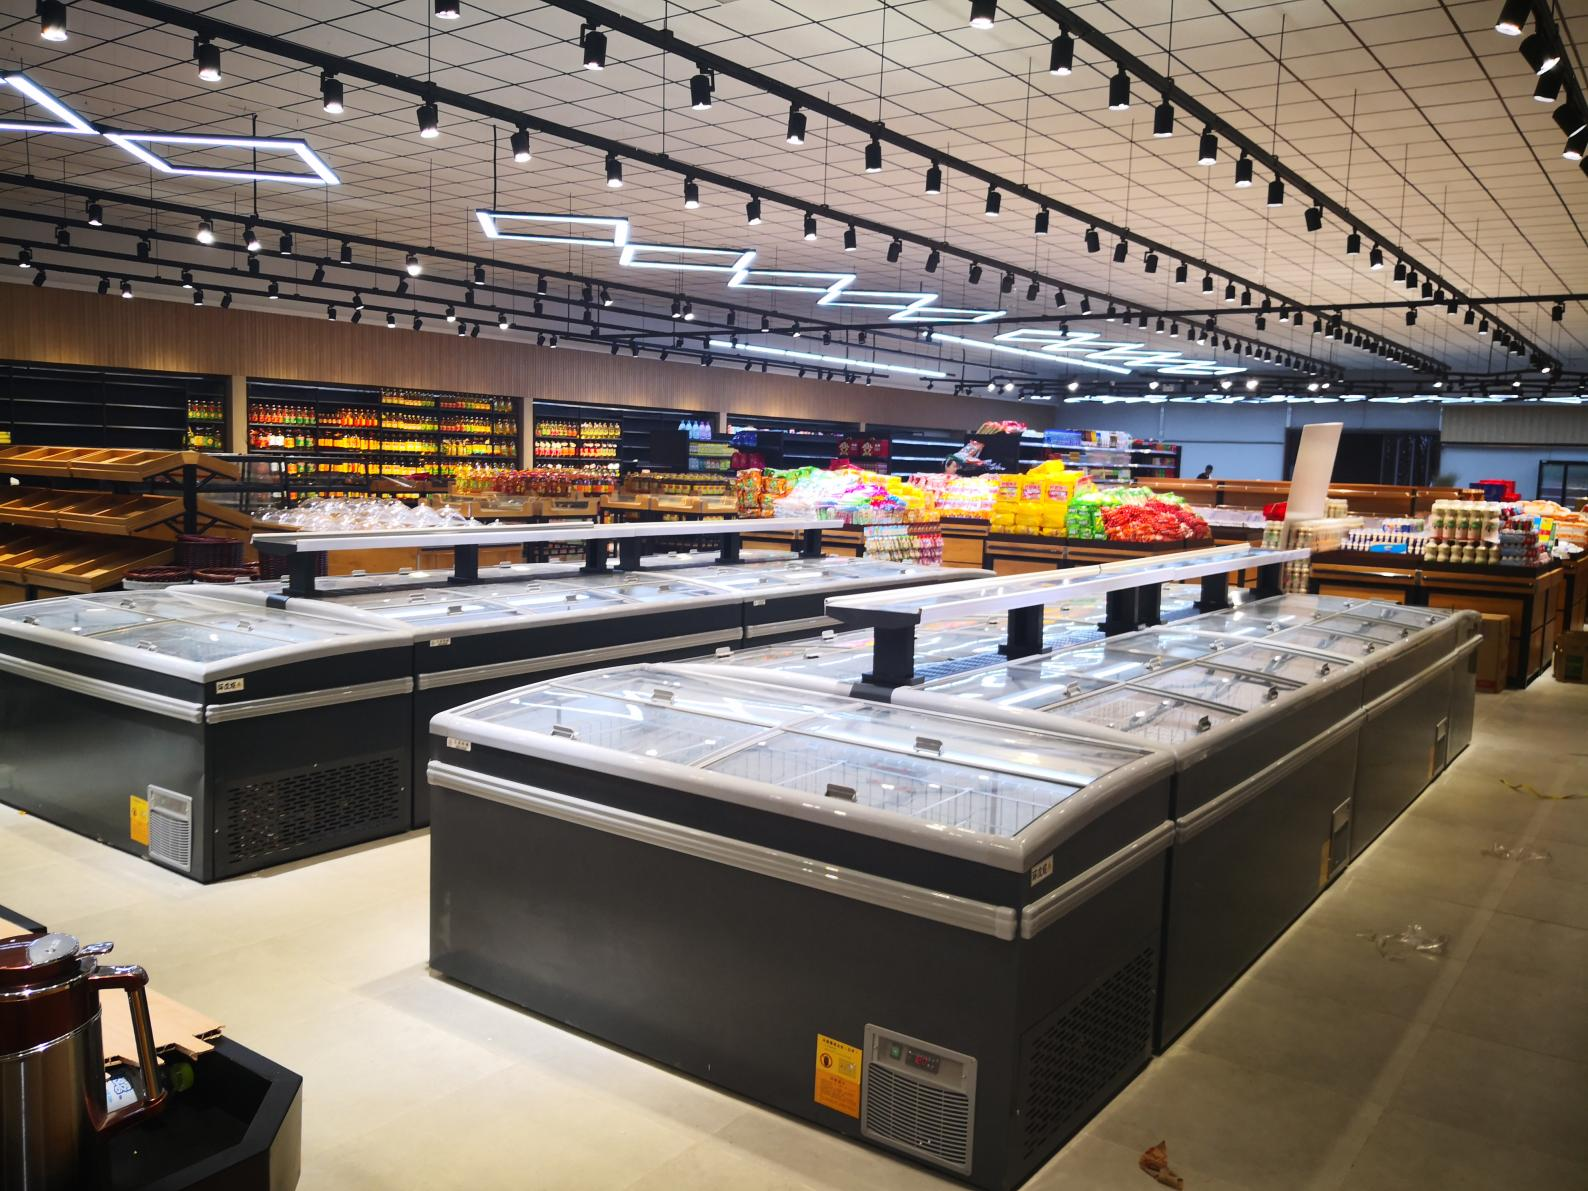 What are the common methods of supermarket freezer maintenance?